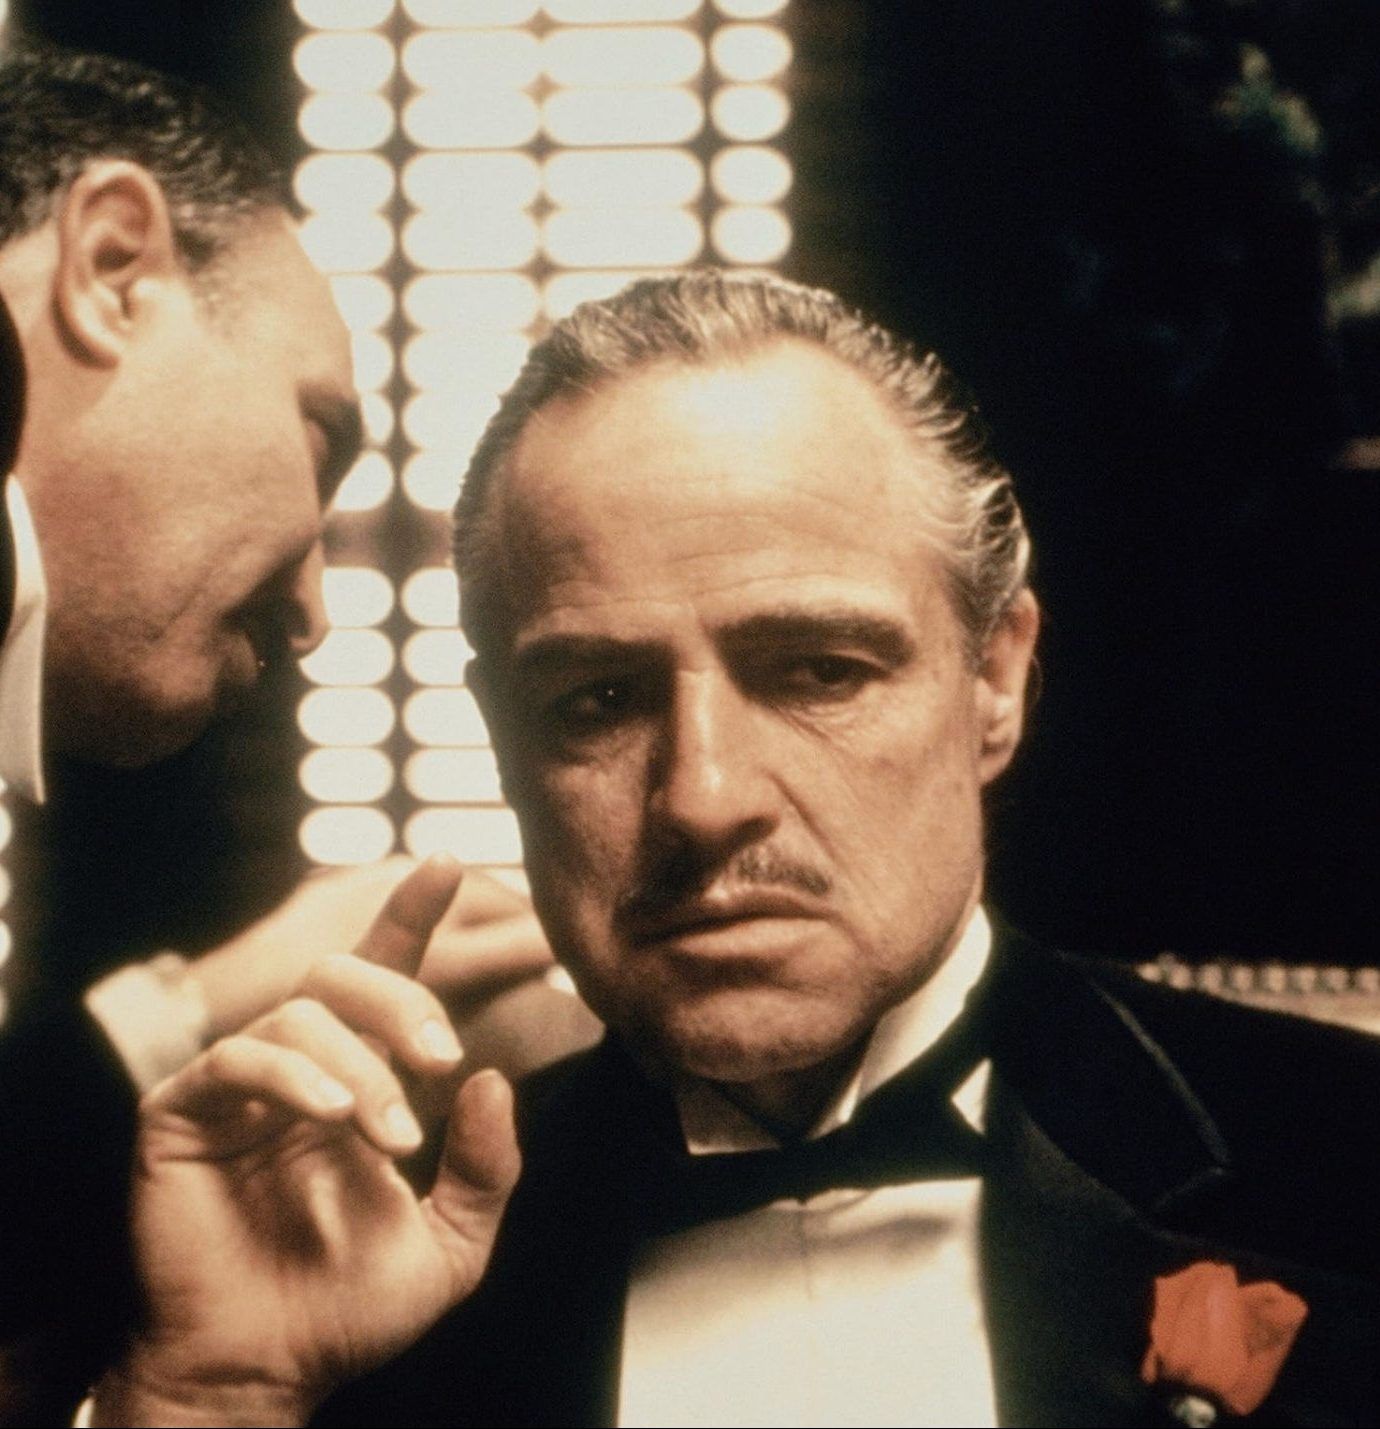 Marlon Brando’s tuxedo from “The Godfather” is being auctioned